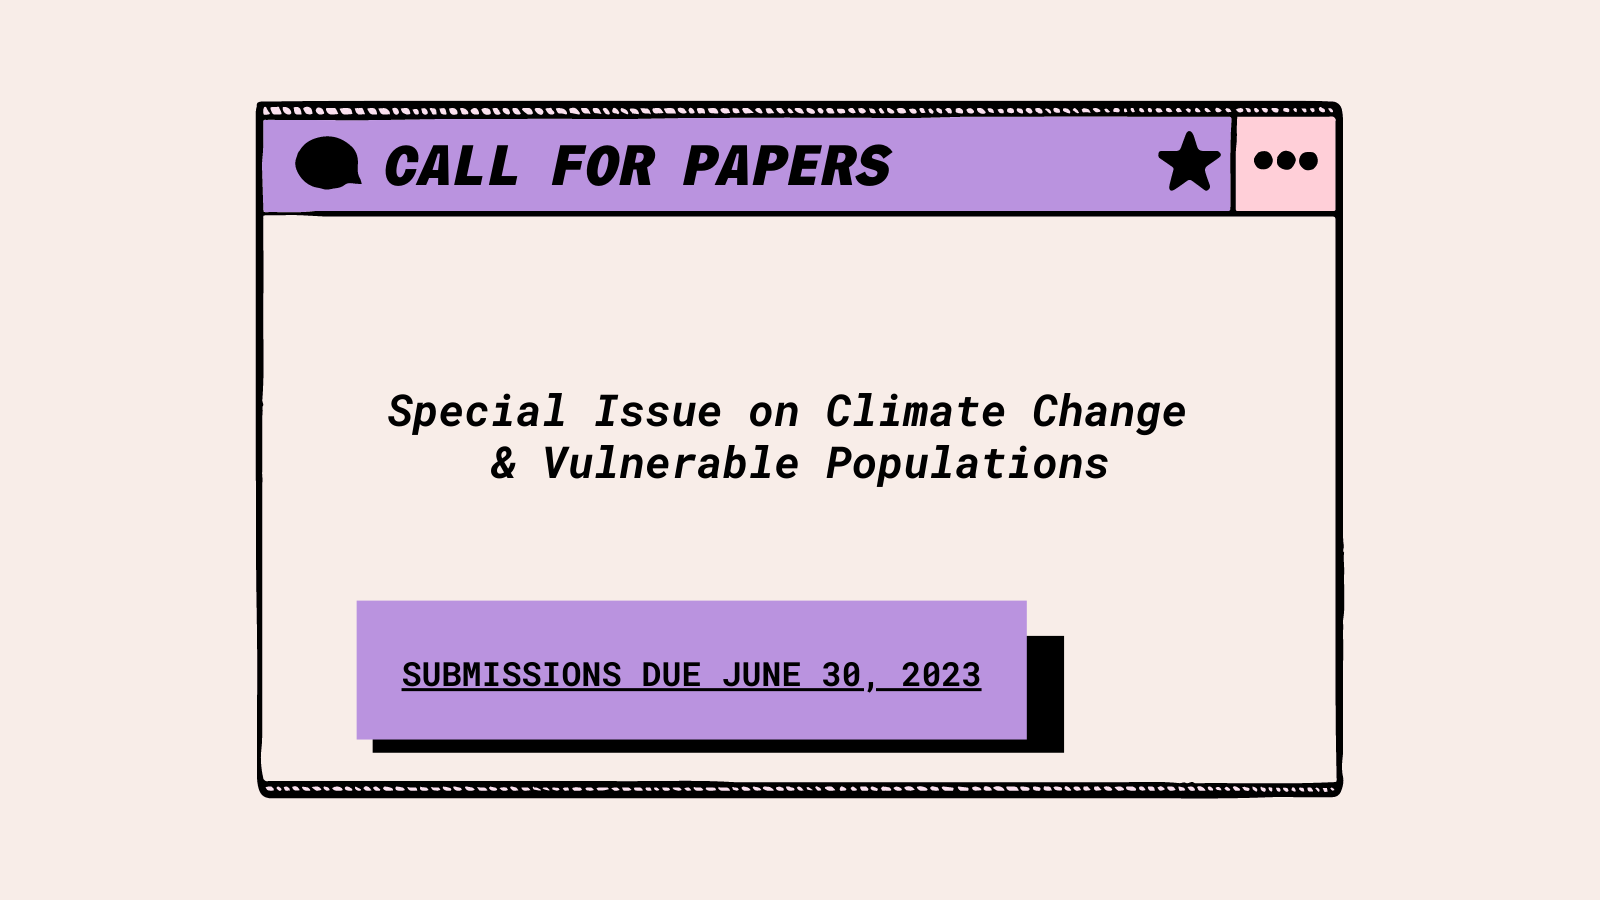 Call for papers (2)